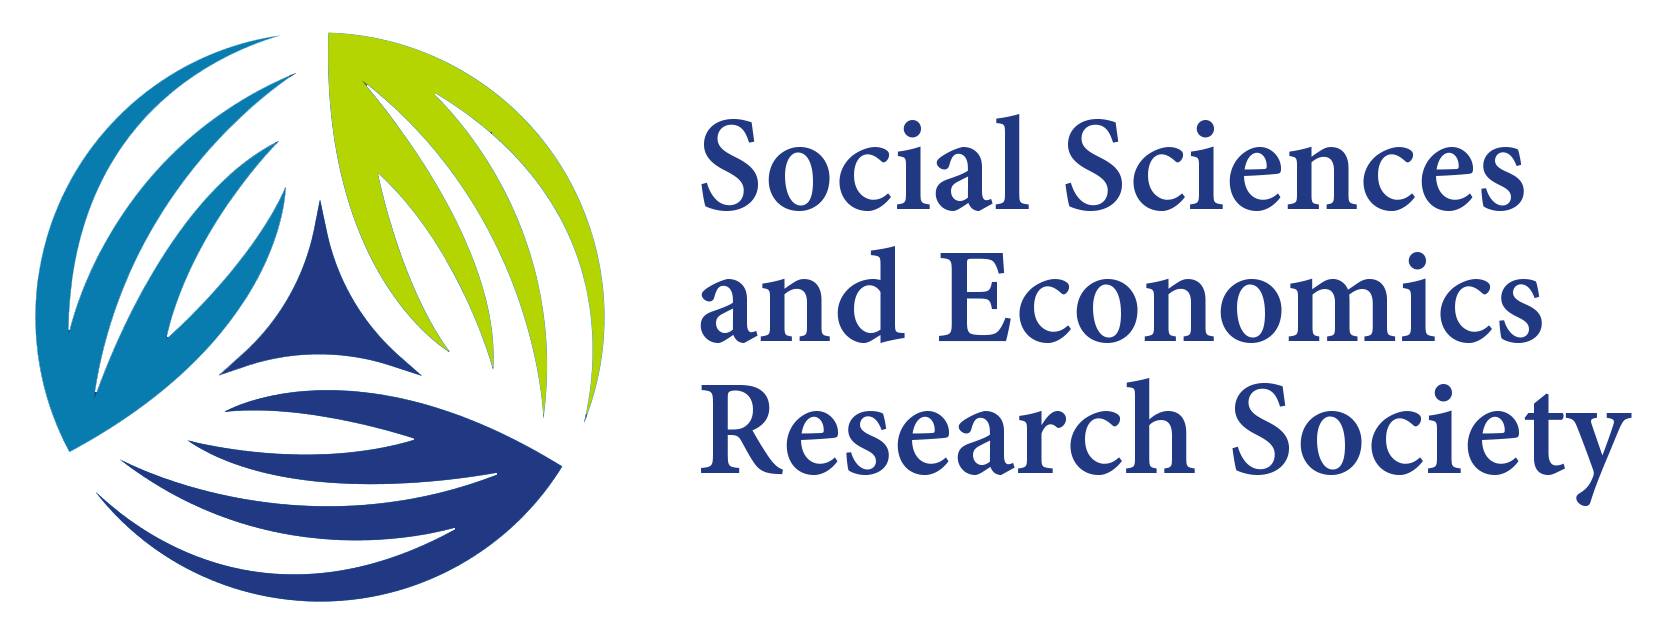 SSERS 2nd International Conference on  Human Capital, Social Sciences, Business Economics & Management Research